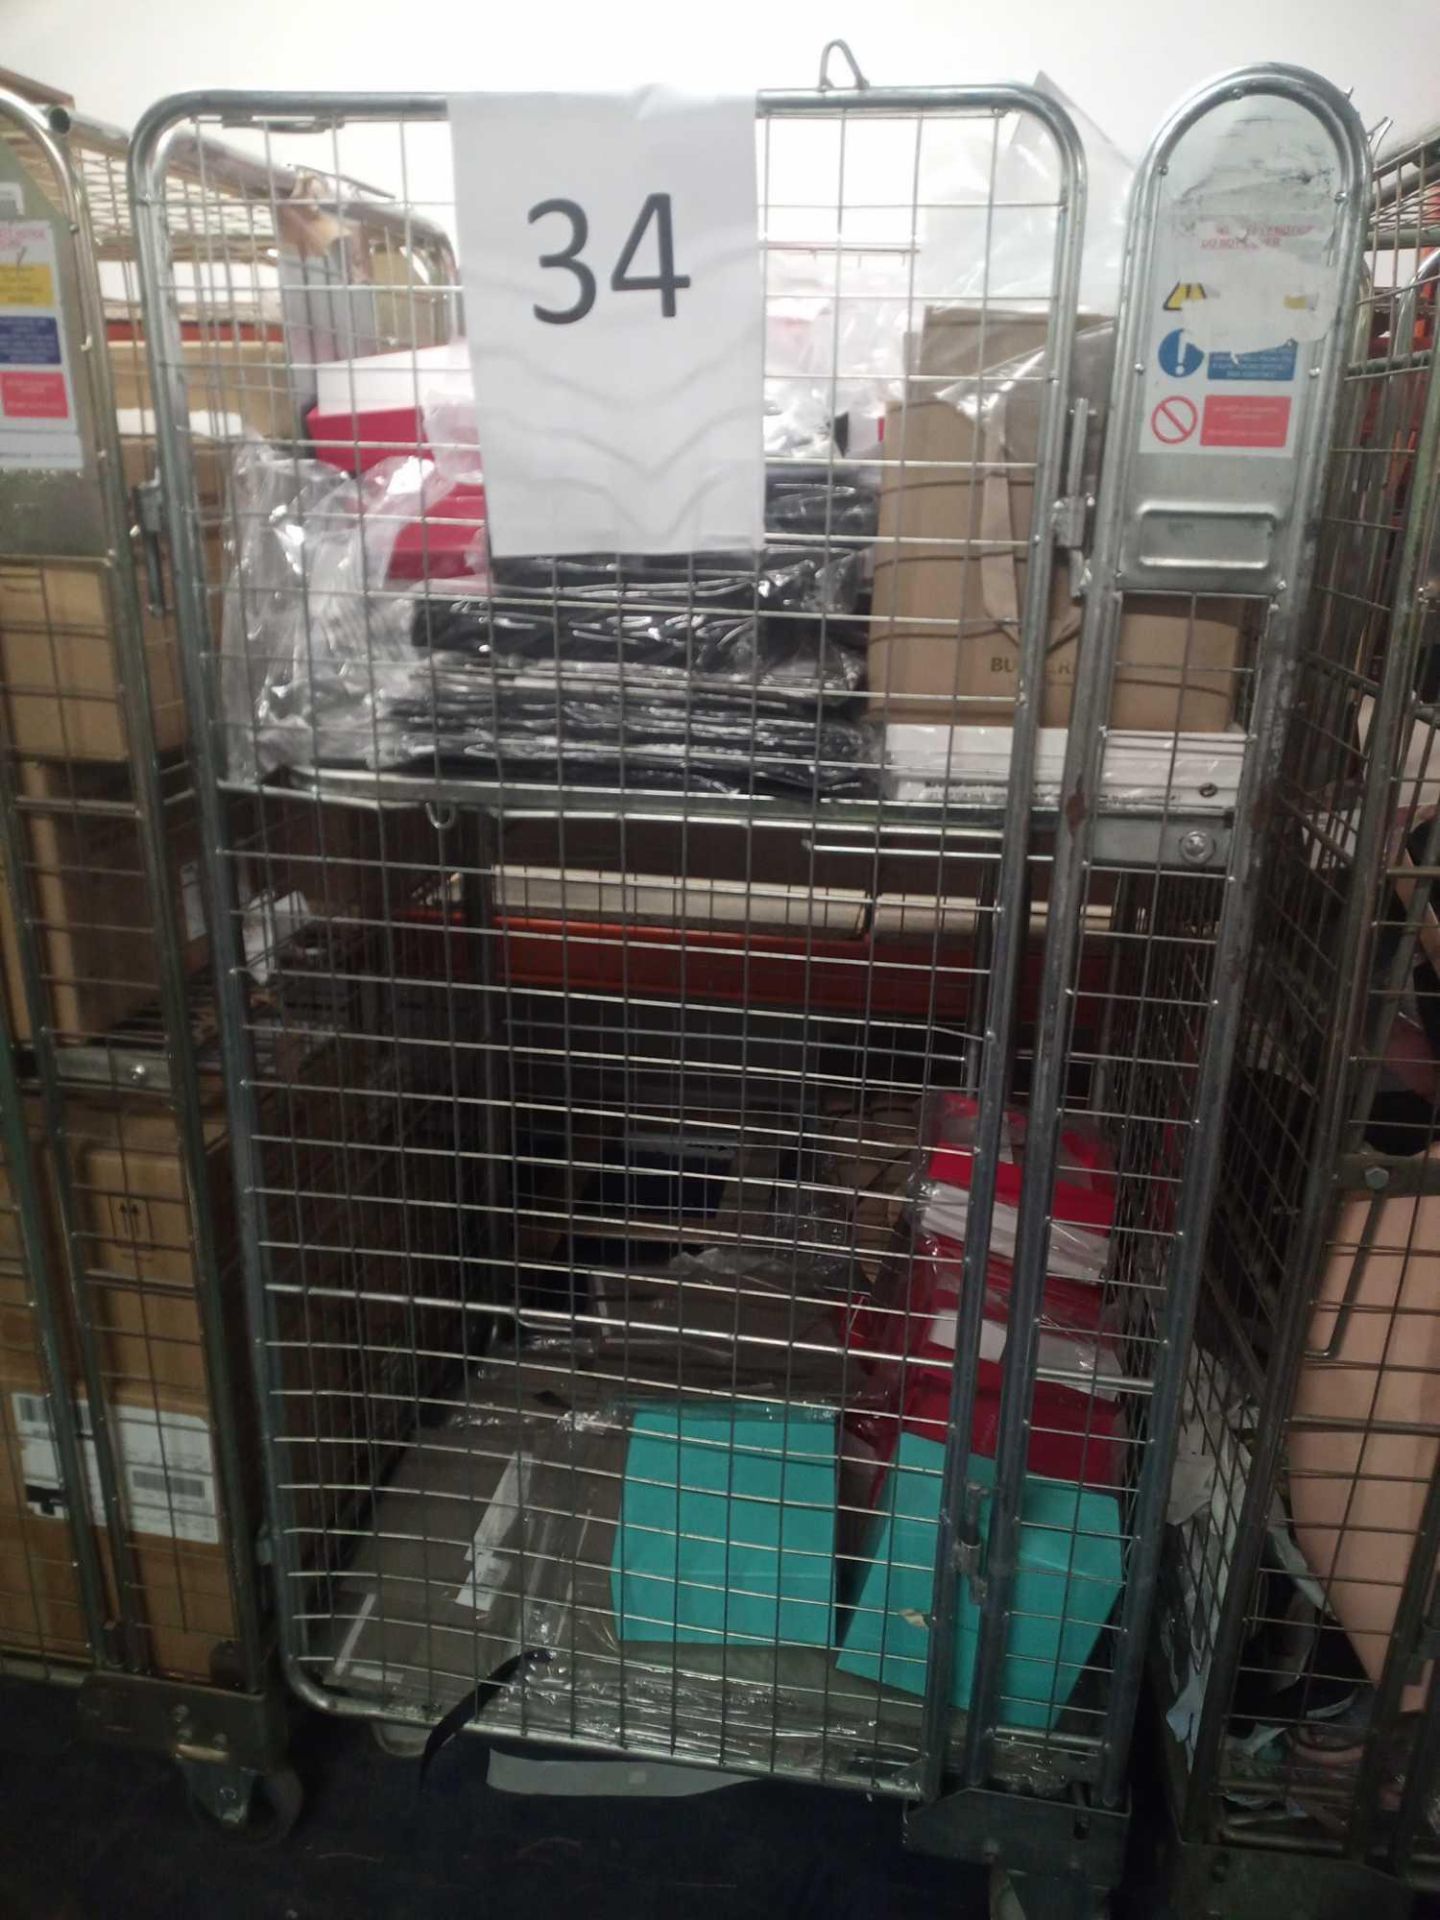 Pallet To Contain A Large Assortment Of Debenhams Goods Such As Tiffany And Co. Gift Sets, Lacome Pa